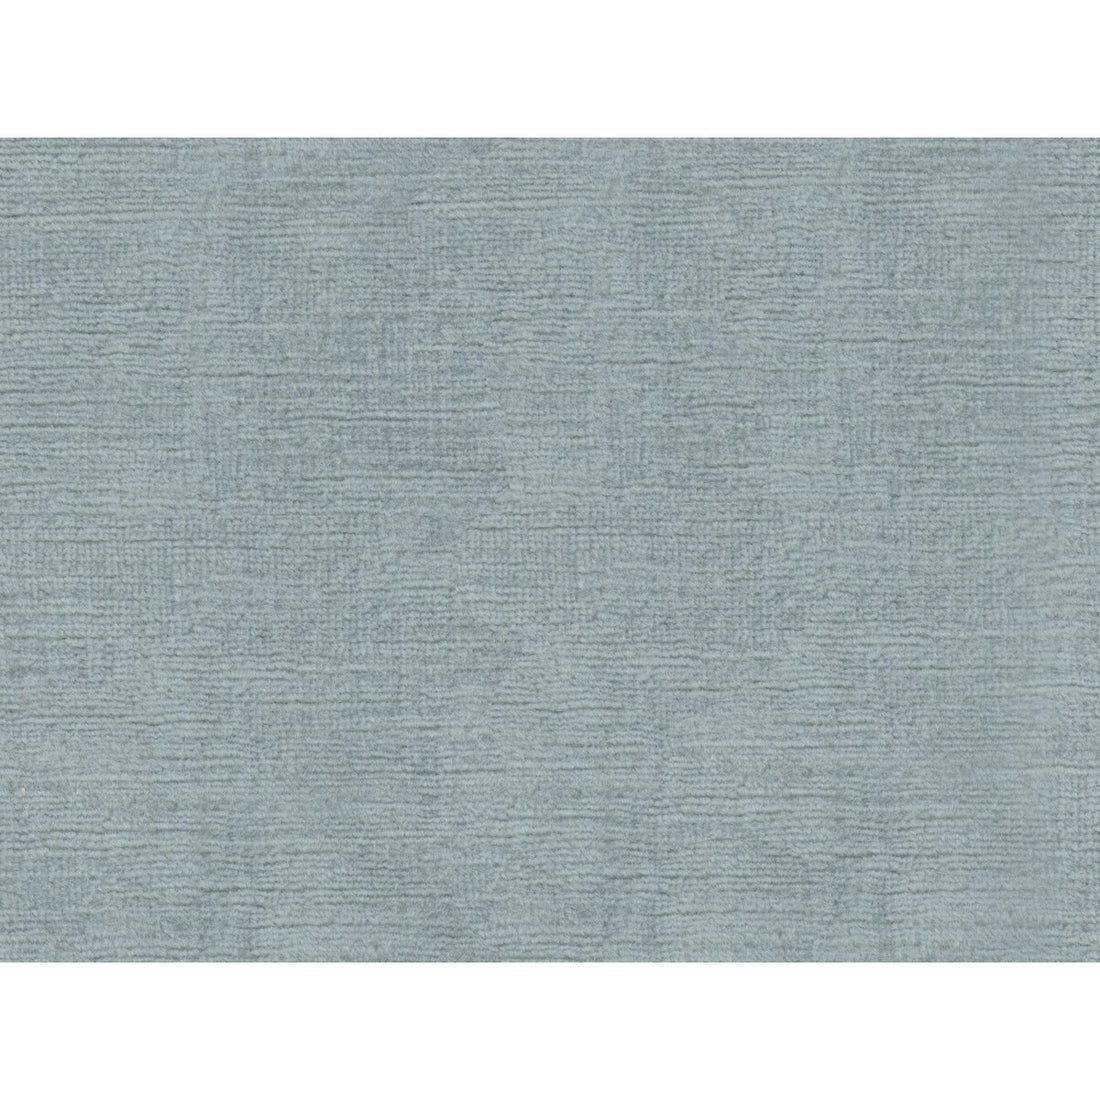 Fulham Linen V fabric in mist color - pattern 2016133.150.0 - by Lee Jofa